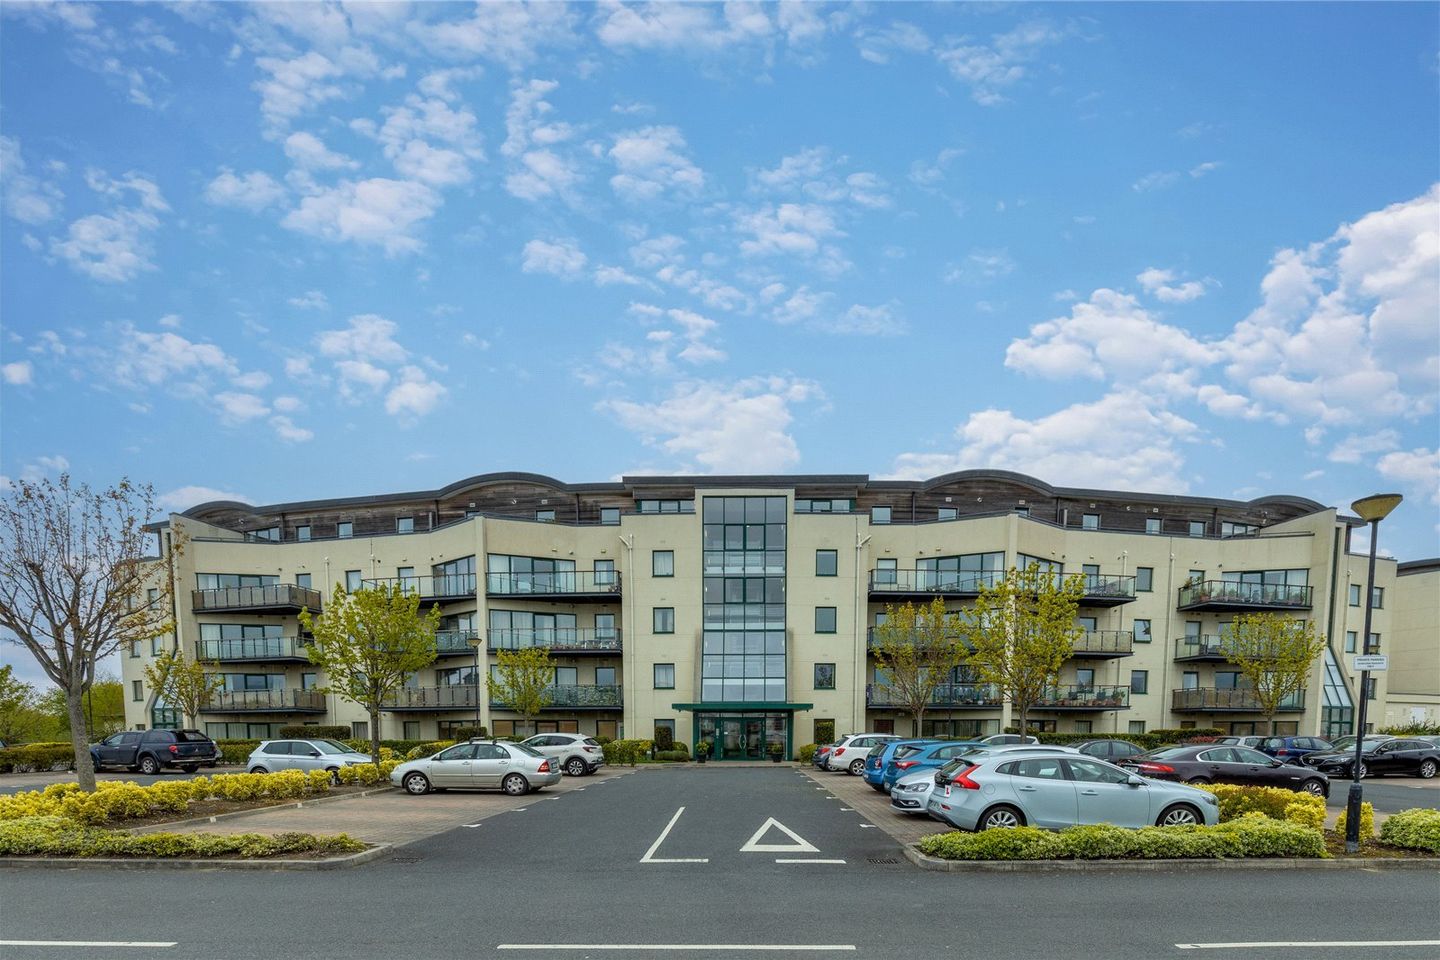 153 The Anchorage, Seabourne View, Greystones, Co. Wicklow, A63H318